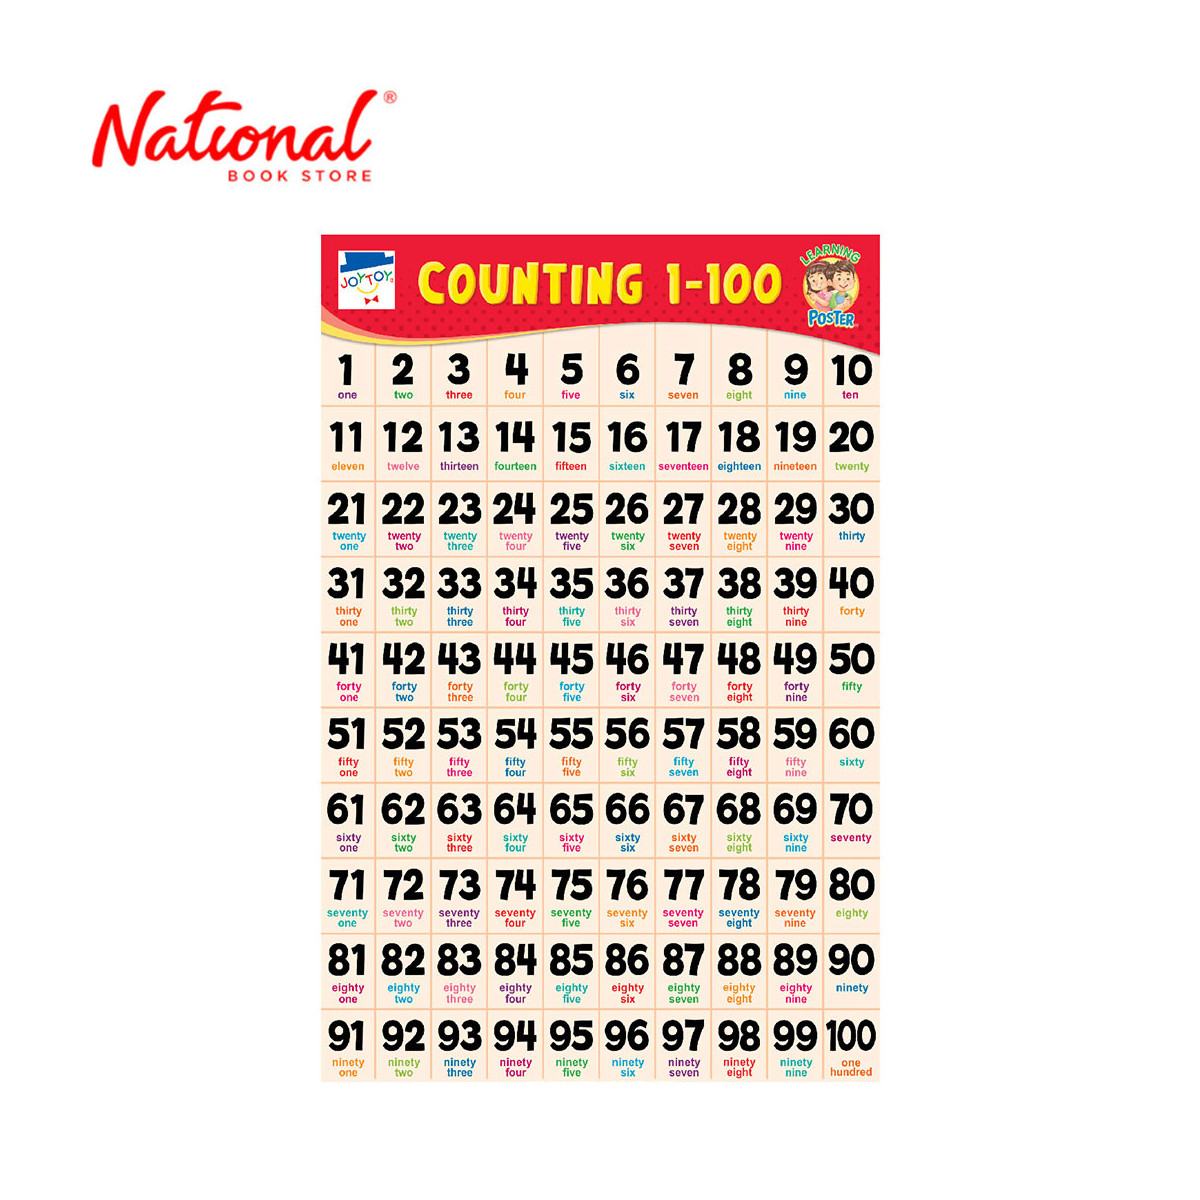 Counting 1-100 Poster (ET-315) by JC Lucas Creative Prods. Inc. - Academic - Elementary - Visual Aid